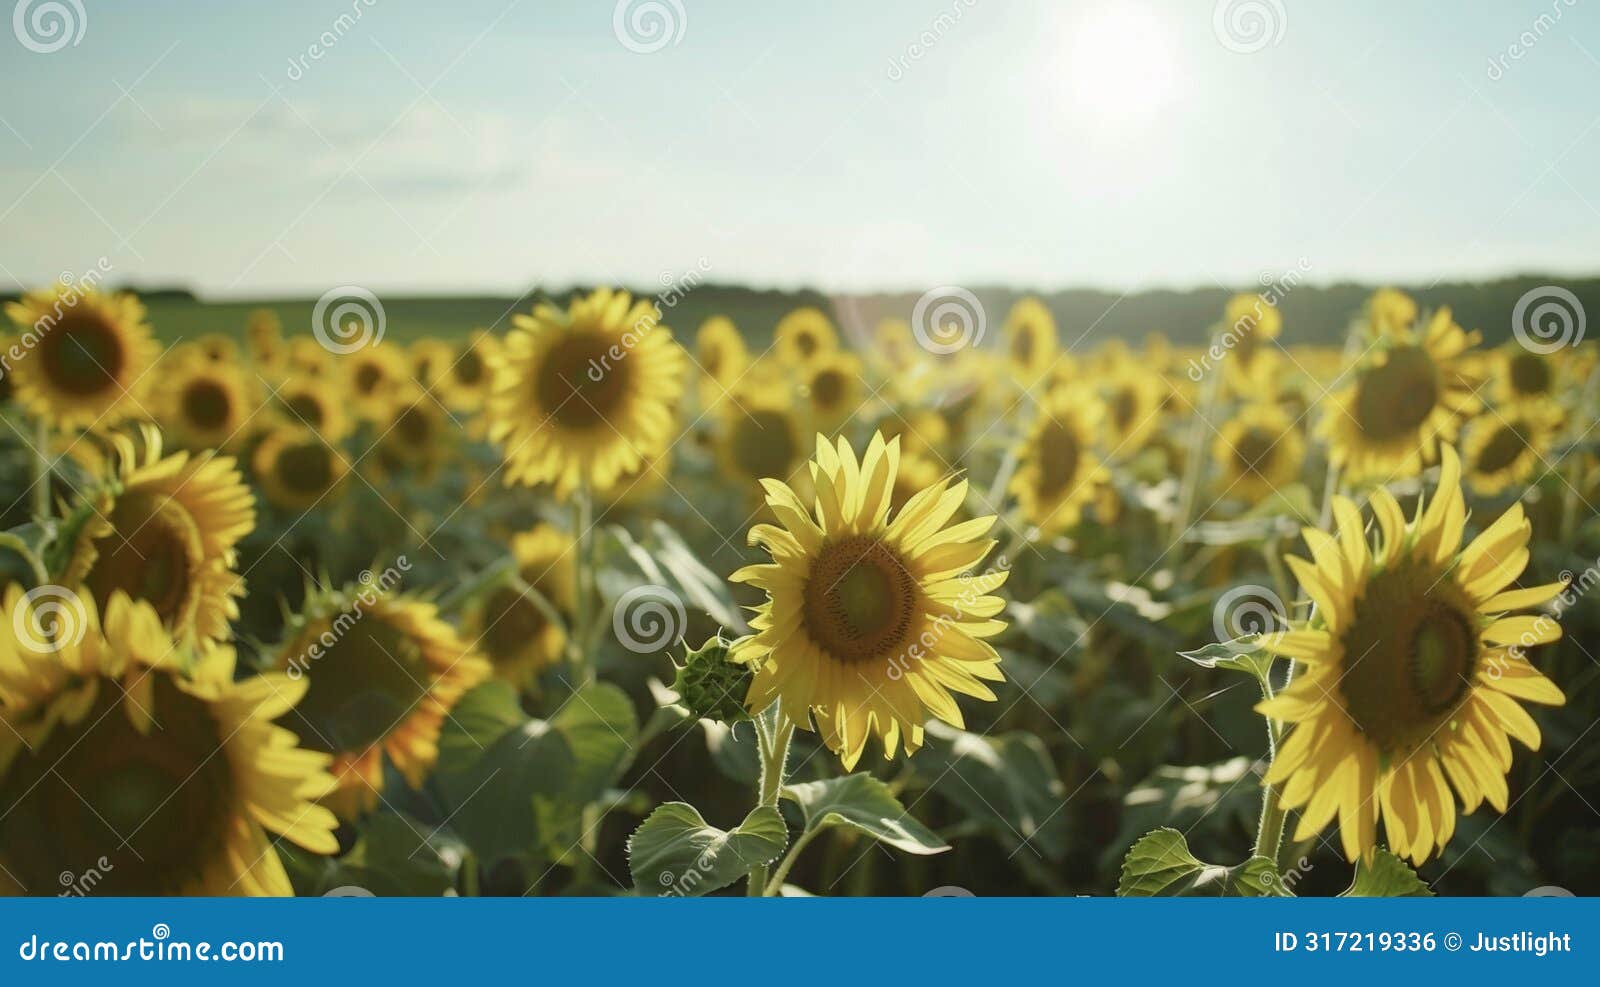 a field of blooming sunflowers with their bright yellow petals and sweet scent uplifting our moods and filling us with